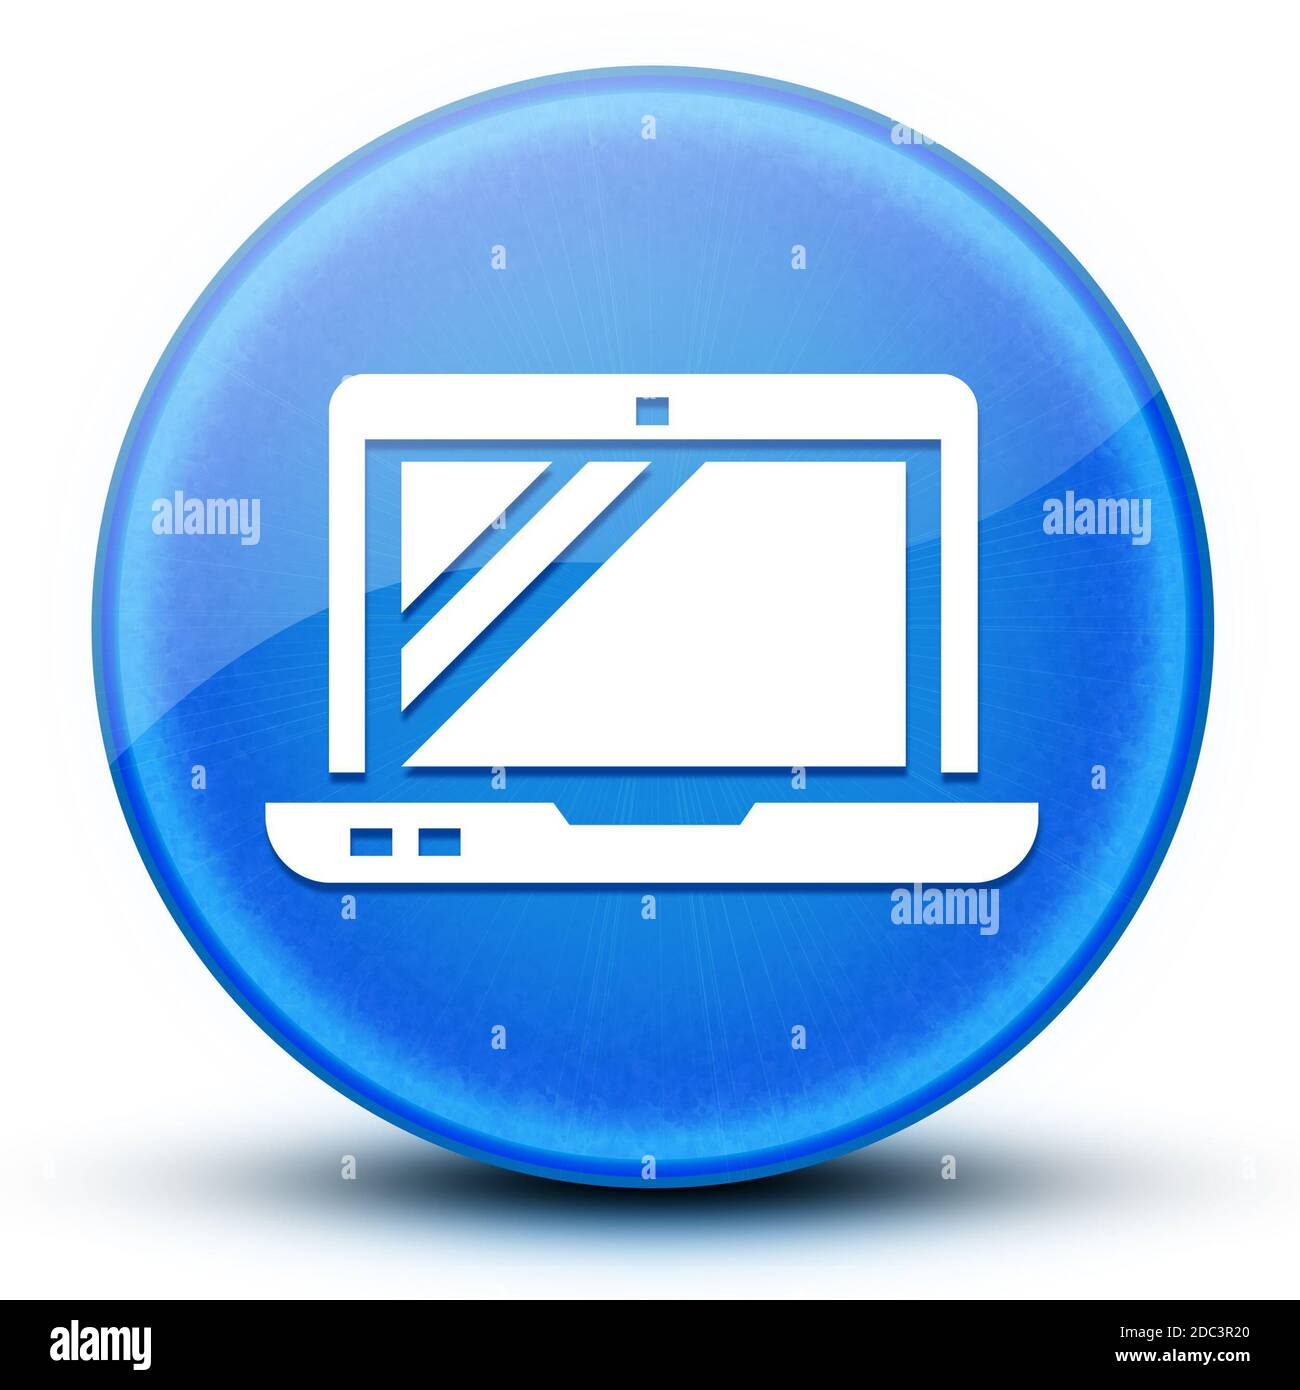 Technical skill eyeball glossy blue round button abstract illustration Stock Photo